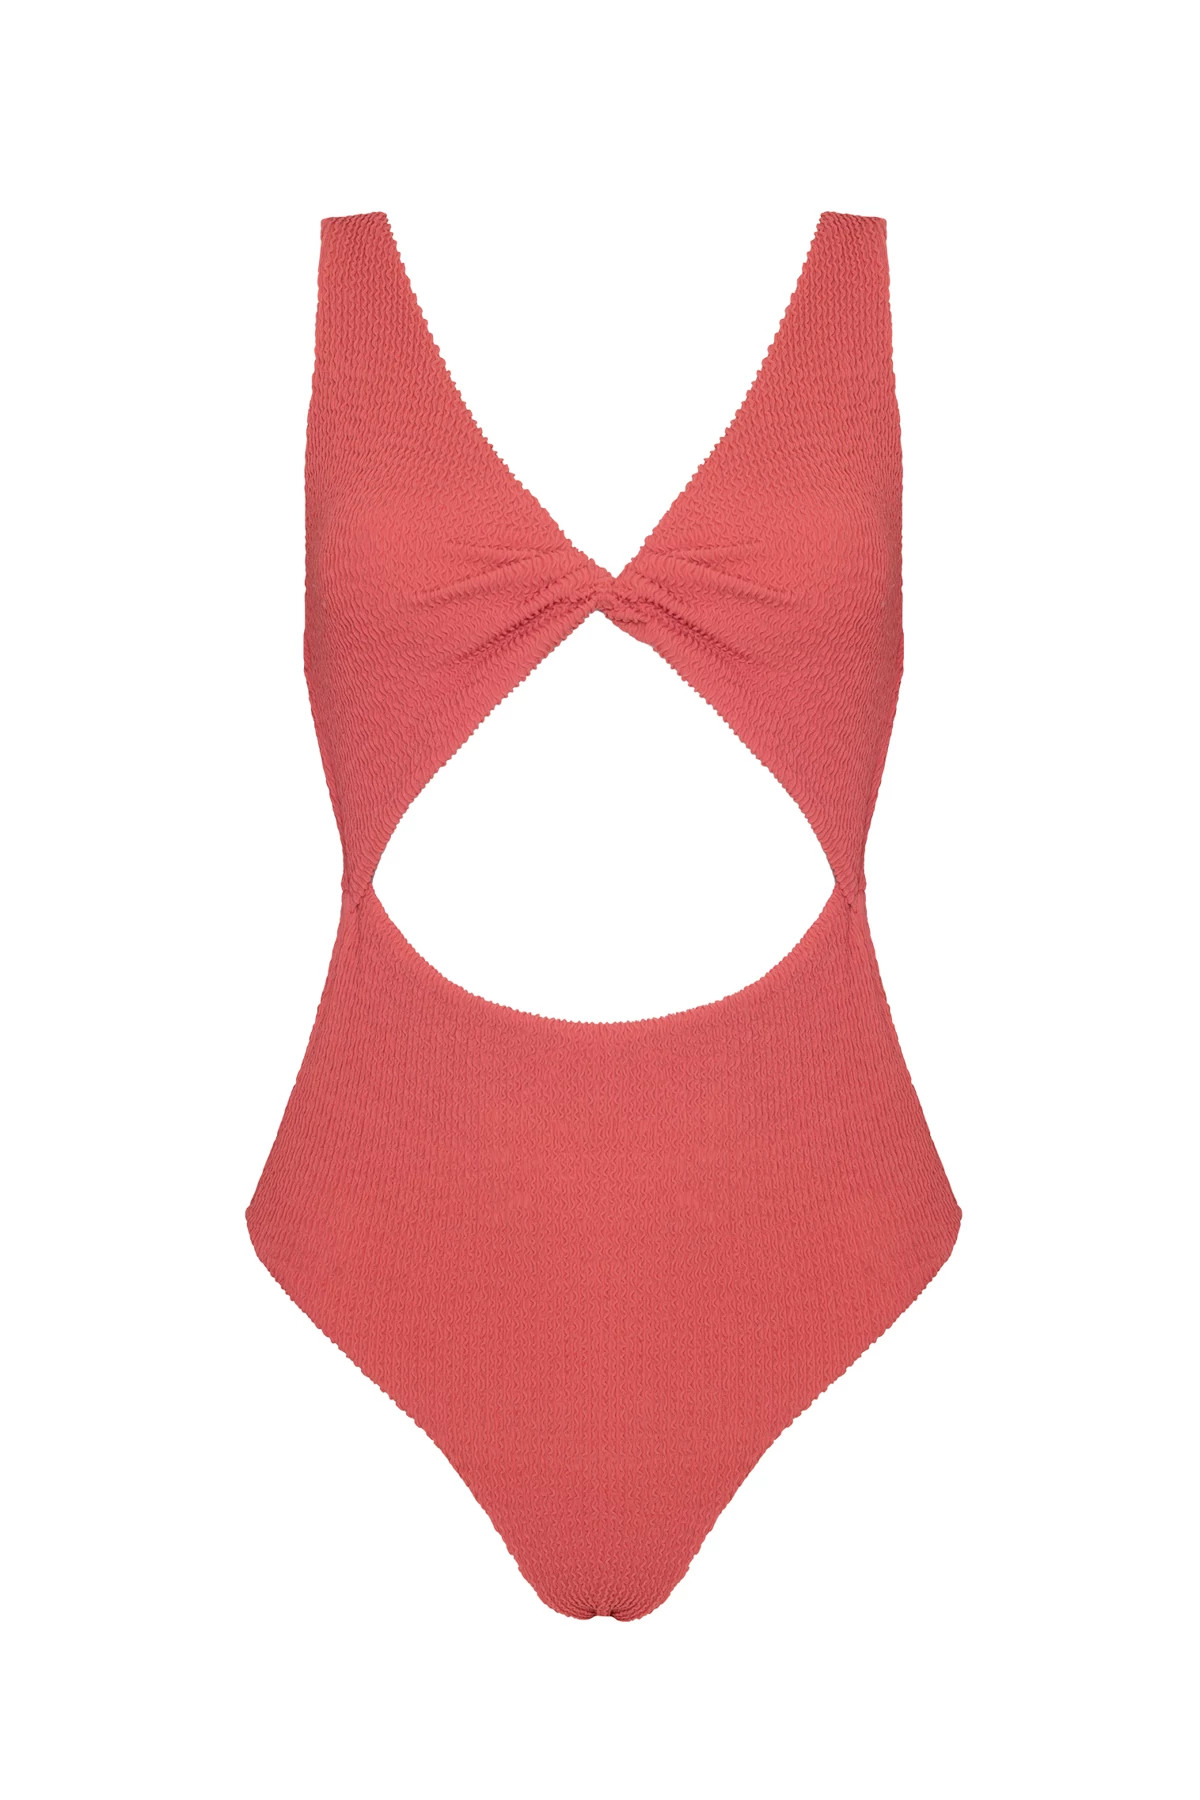 ROSE Textured Wave Twix One Piece Swimsuit image number 3